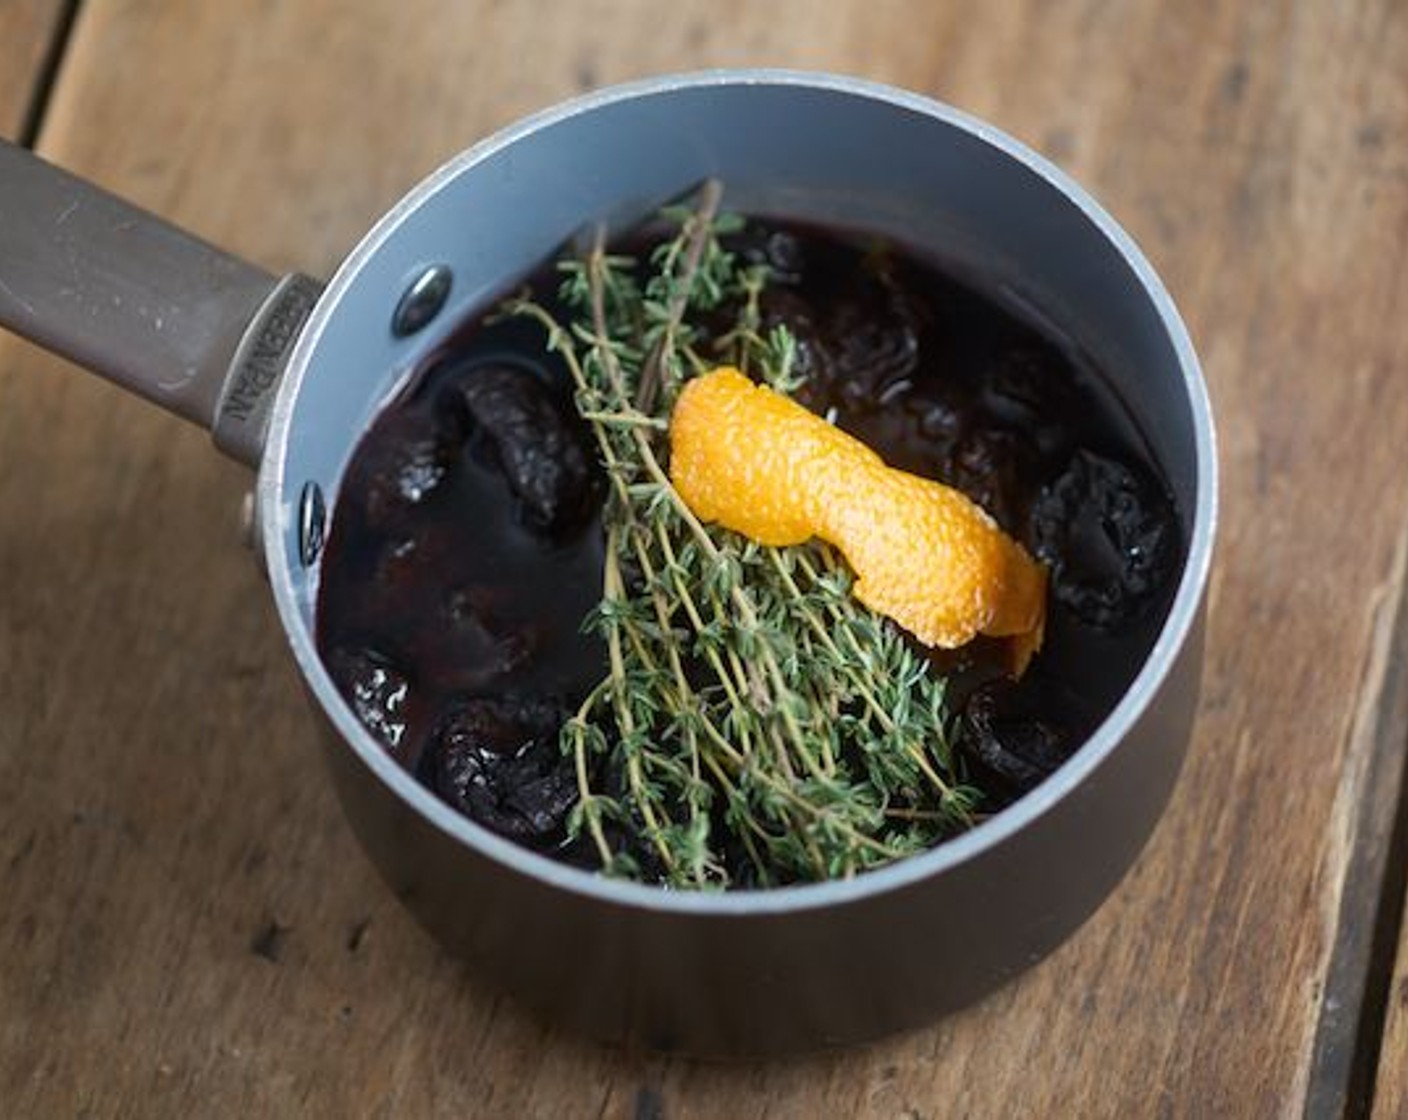 step 1 Place the Prunes (1 3/4 cups) in a small saucepan with Fresh Thyme (6 sprigs), peel of the Orange (1), and Water (1/2 cup). Fill with Red Wine (1/2 cup) until fruit is just covered, depending on the size of your pan.